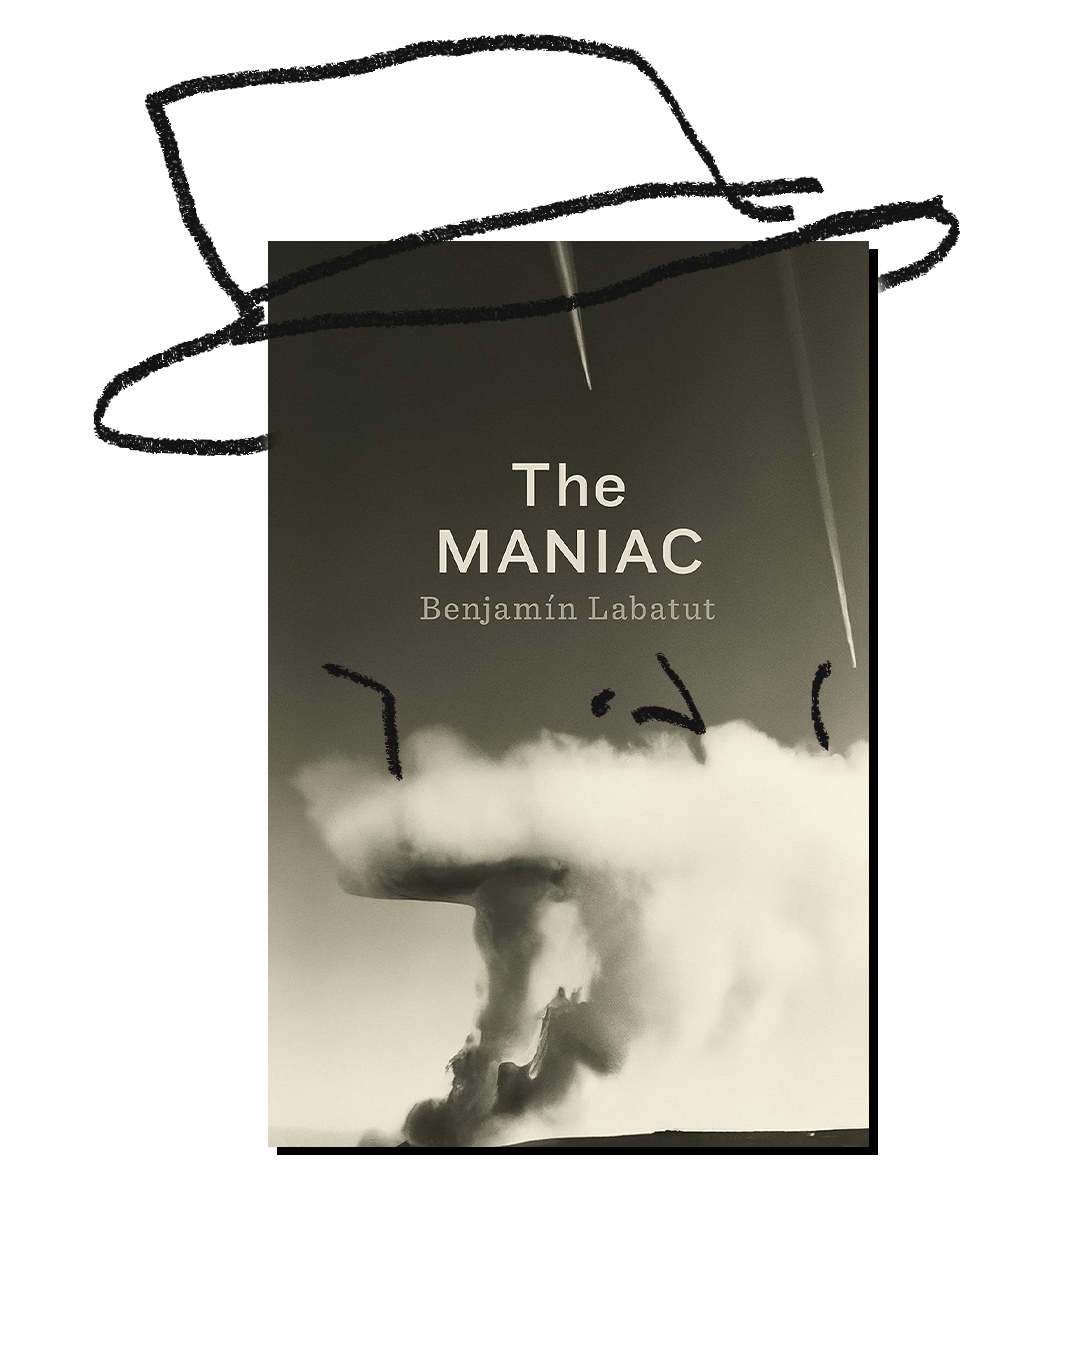 True Enough: “The MANIAC” and “Oppenheimer” — Cleveland Review of